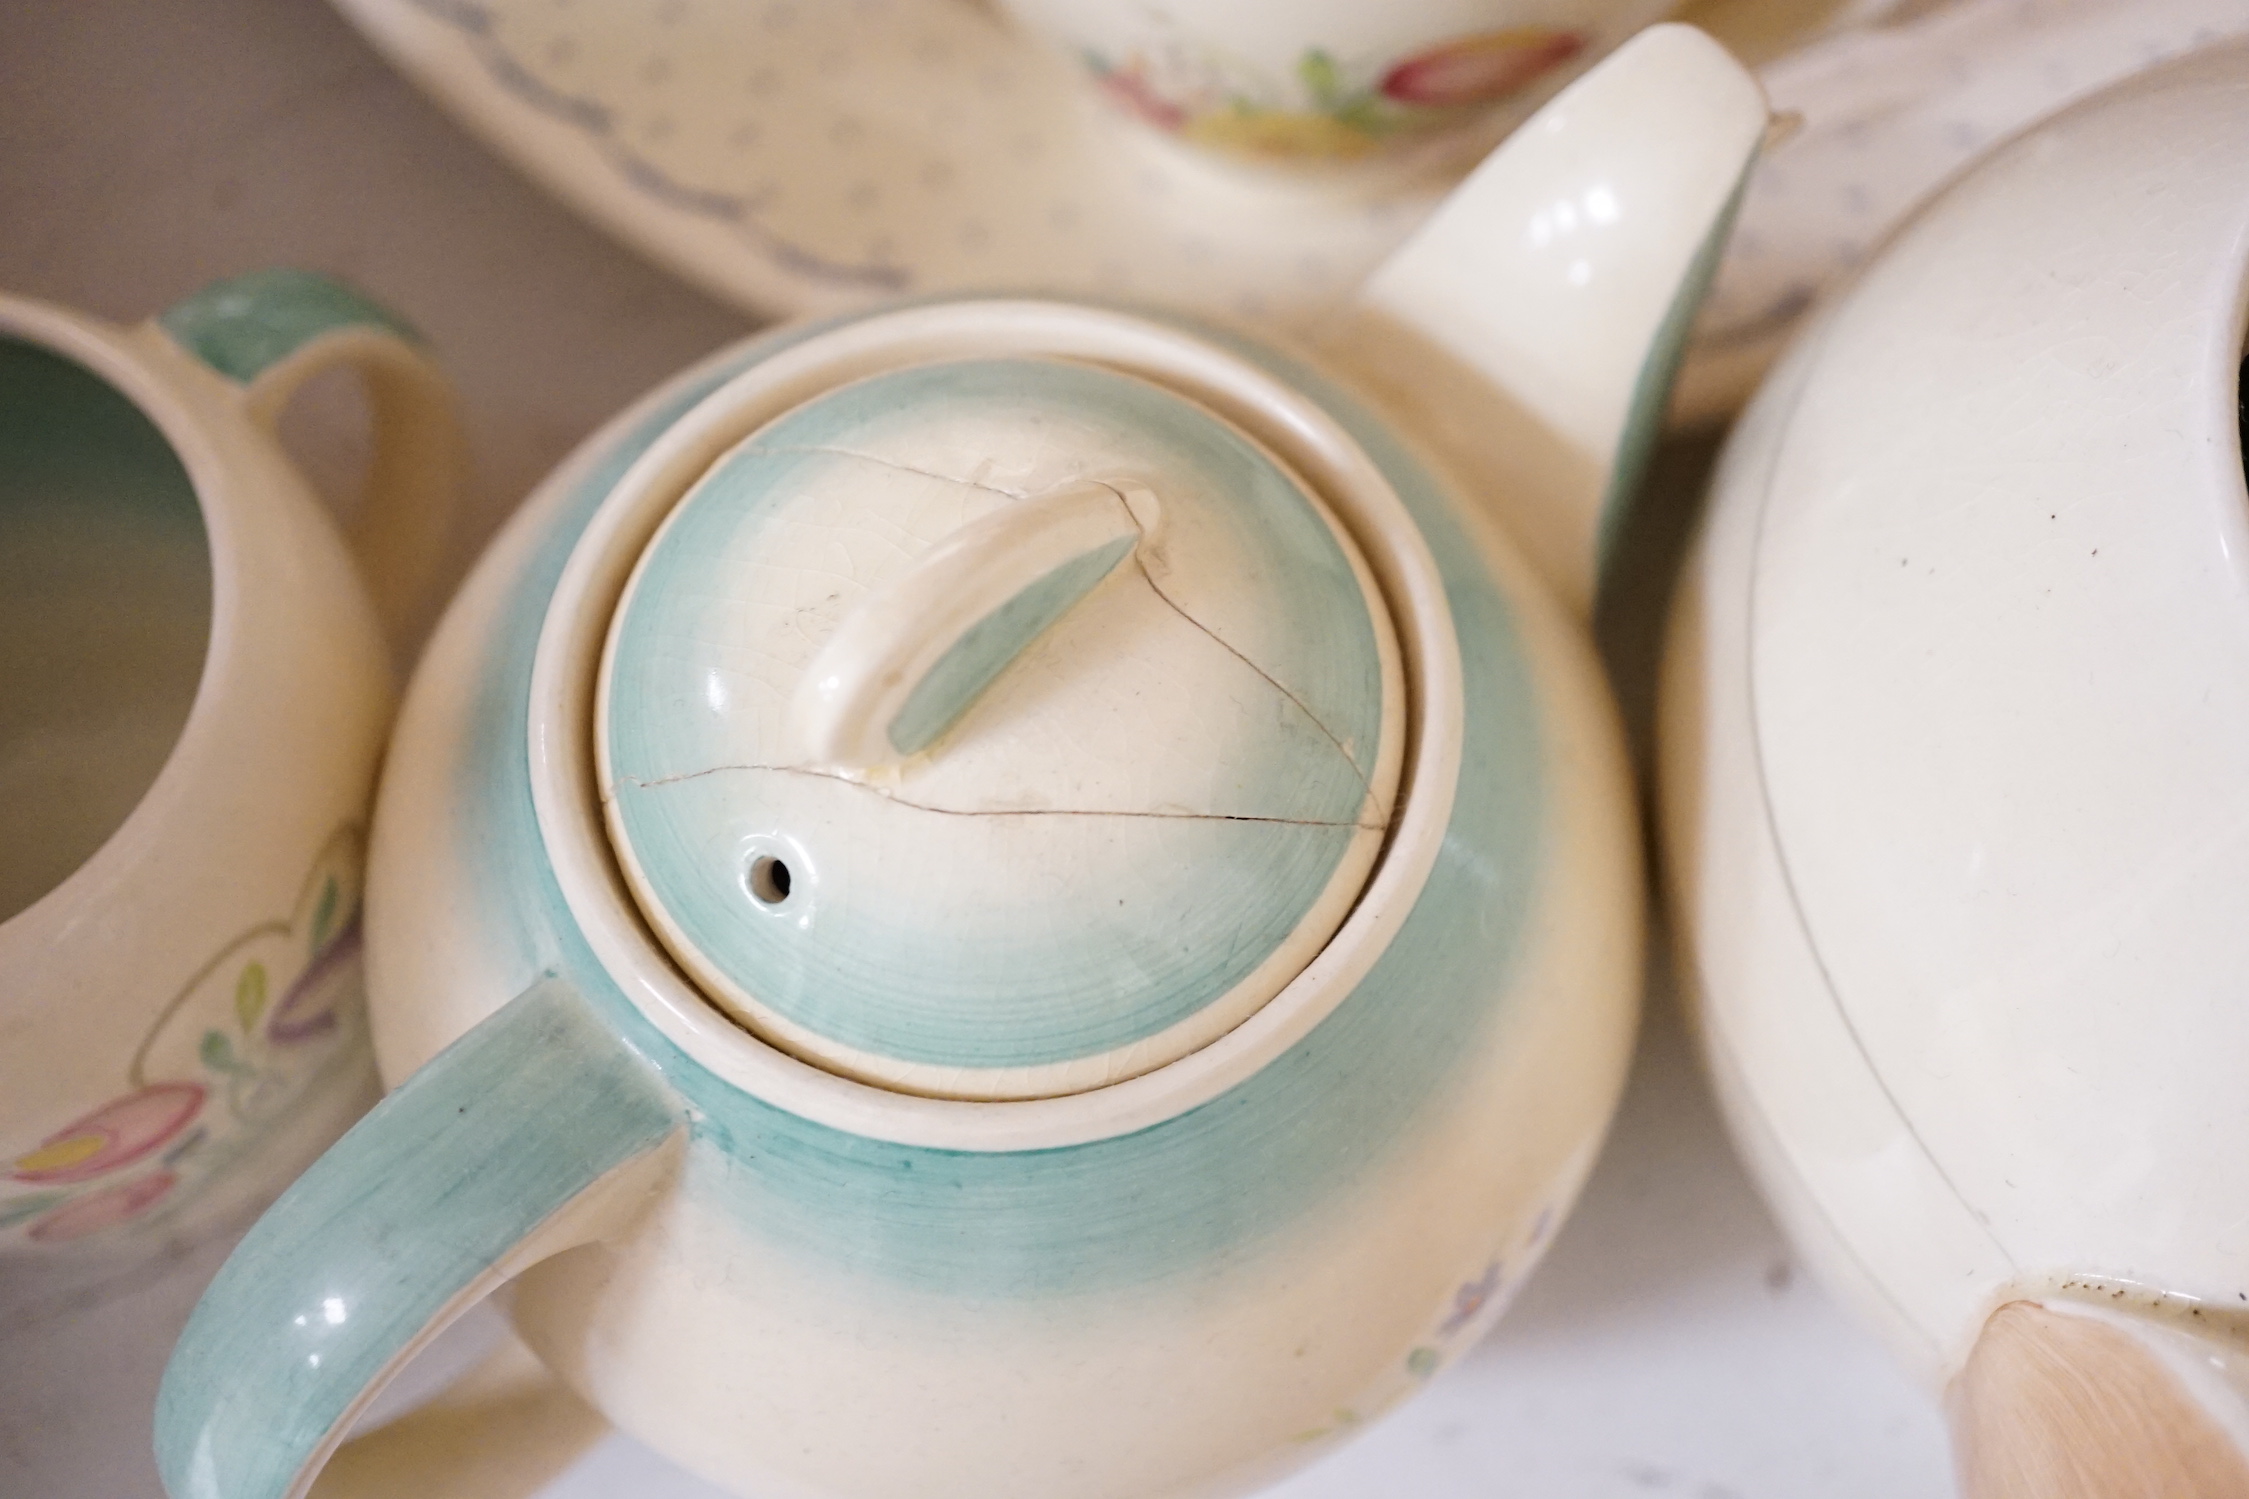 A collection of Susie Cooper ceramics and tablewares including tureens, an oval platter, cups and saucers